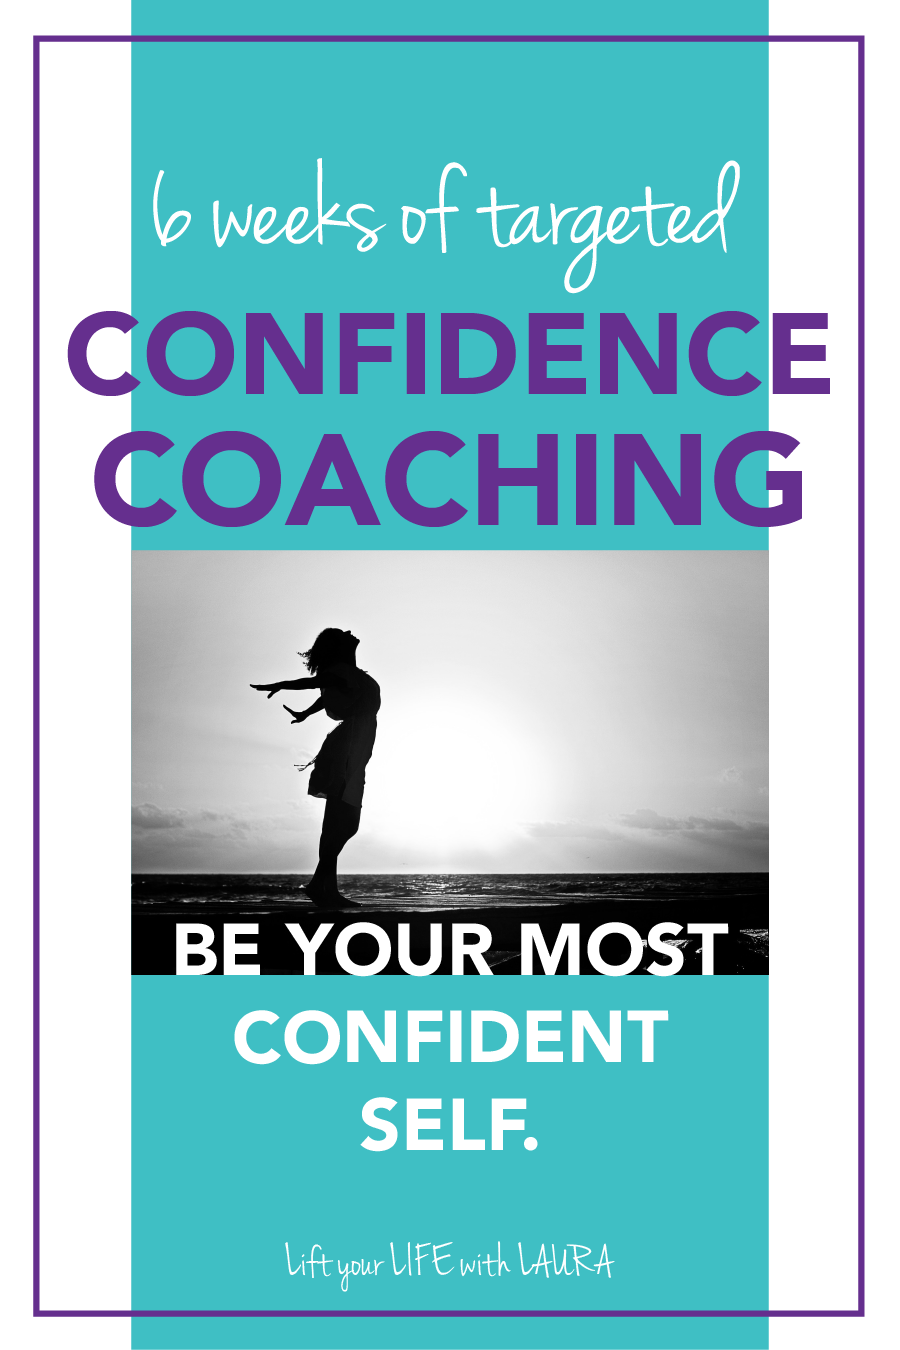 Be your most confident self.  Enroll now for 6 weeks of targeted confidence coaching to help you gain confidence, build self esteem and be empowered!  #liftyourlifewithlaura #confidence #buildconfidence #confidencecoaching